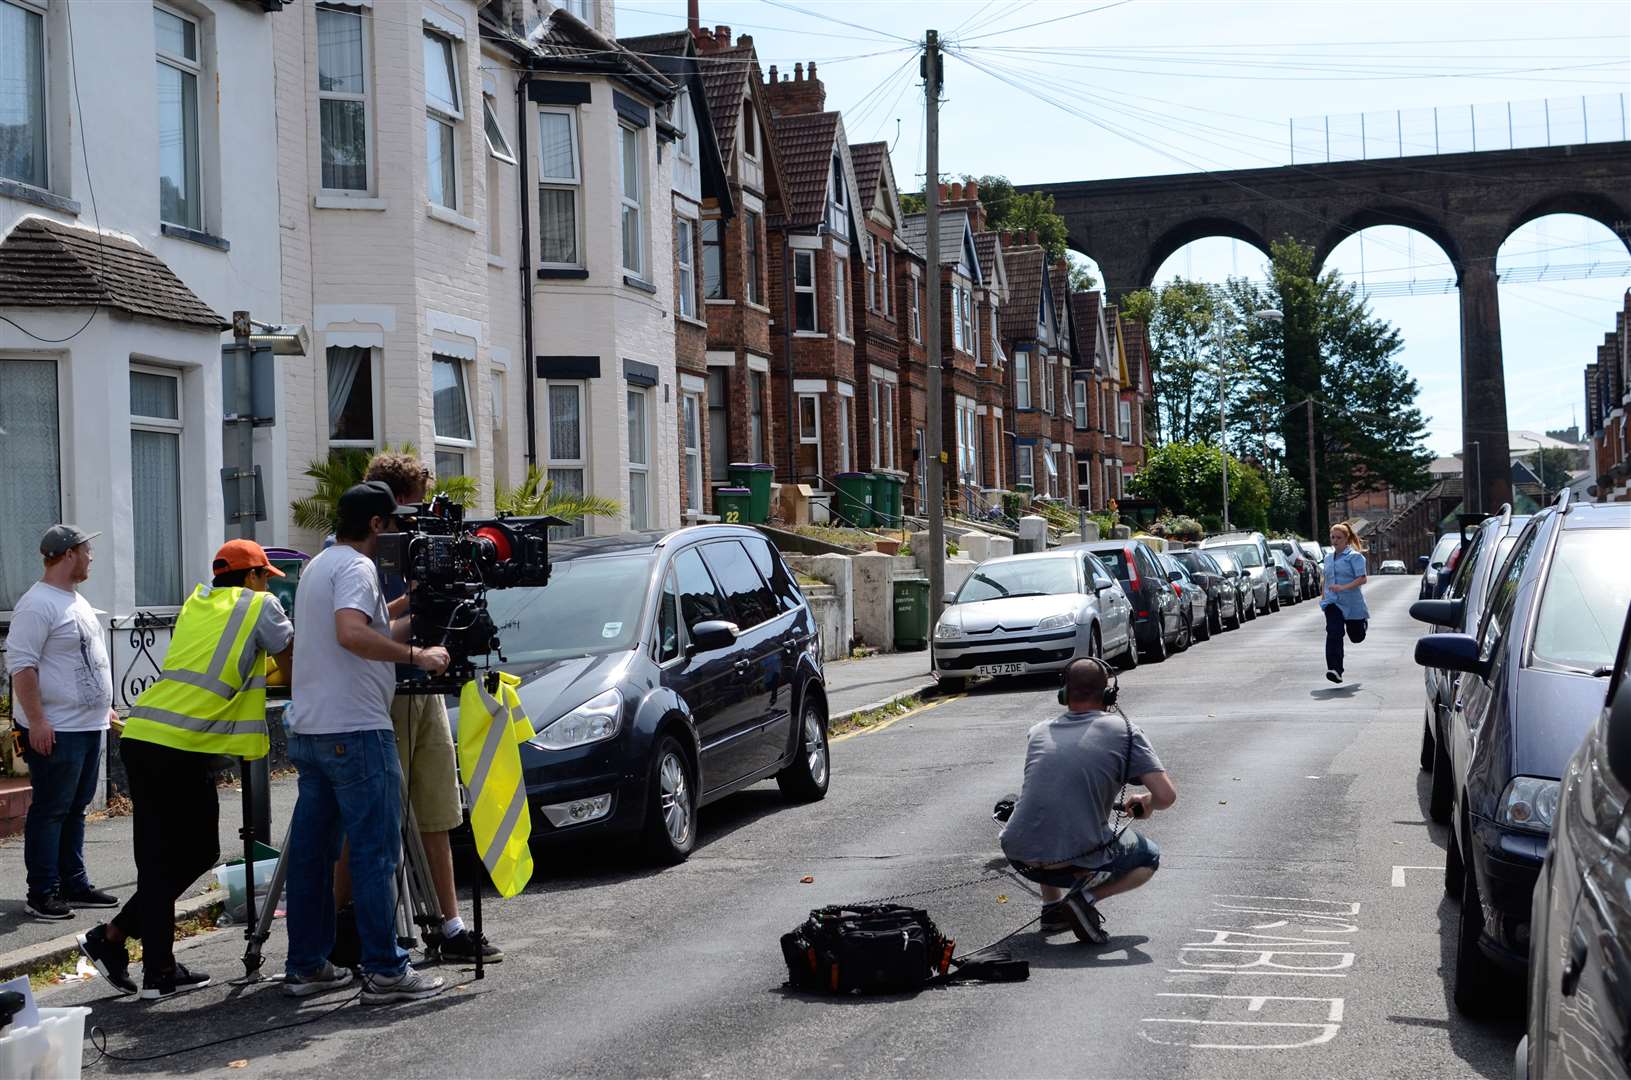 Filming took place in Folkestone and many landscapes can be recognised - such as the viaduct. Picture credit: Seb Garraway